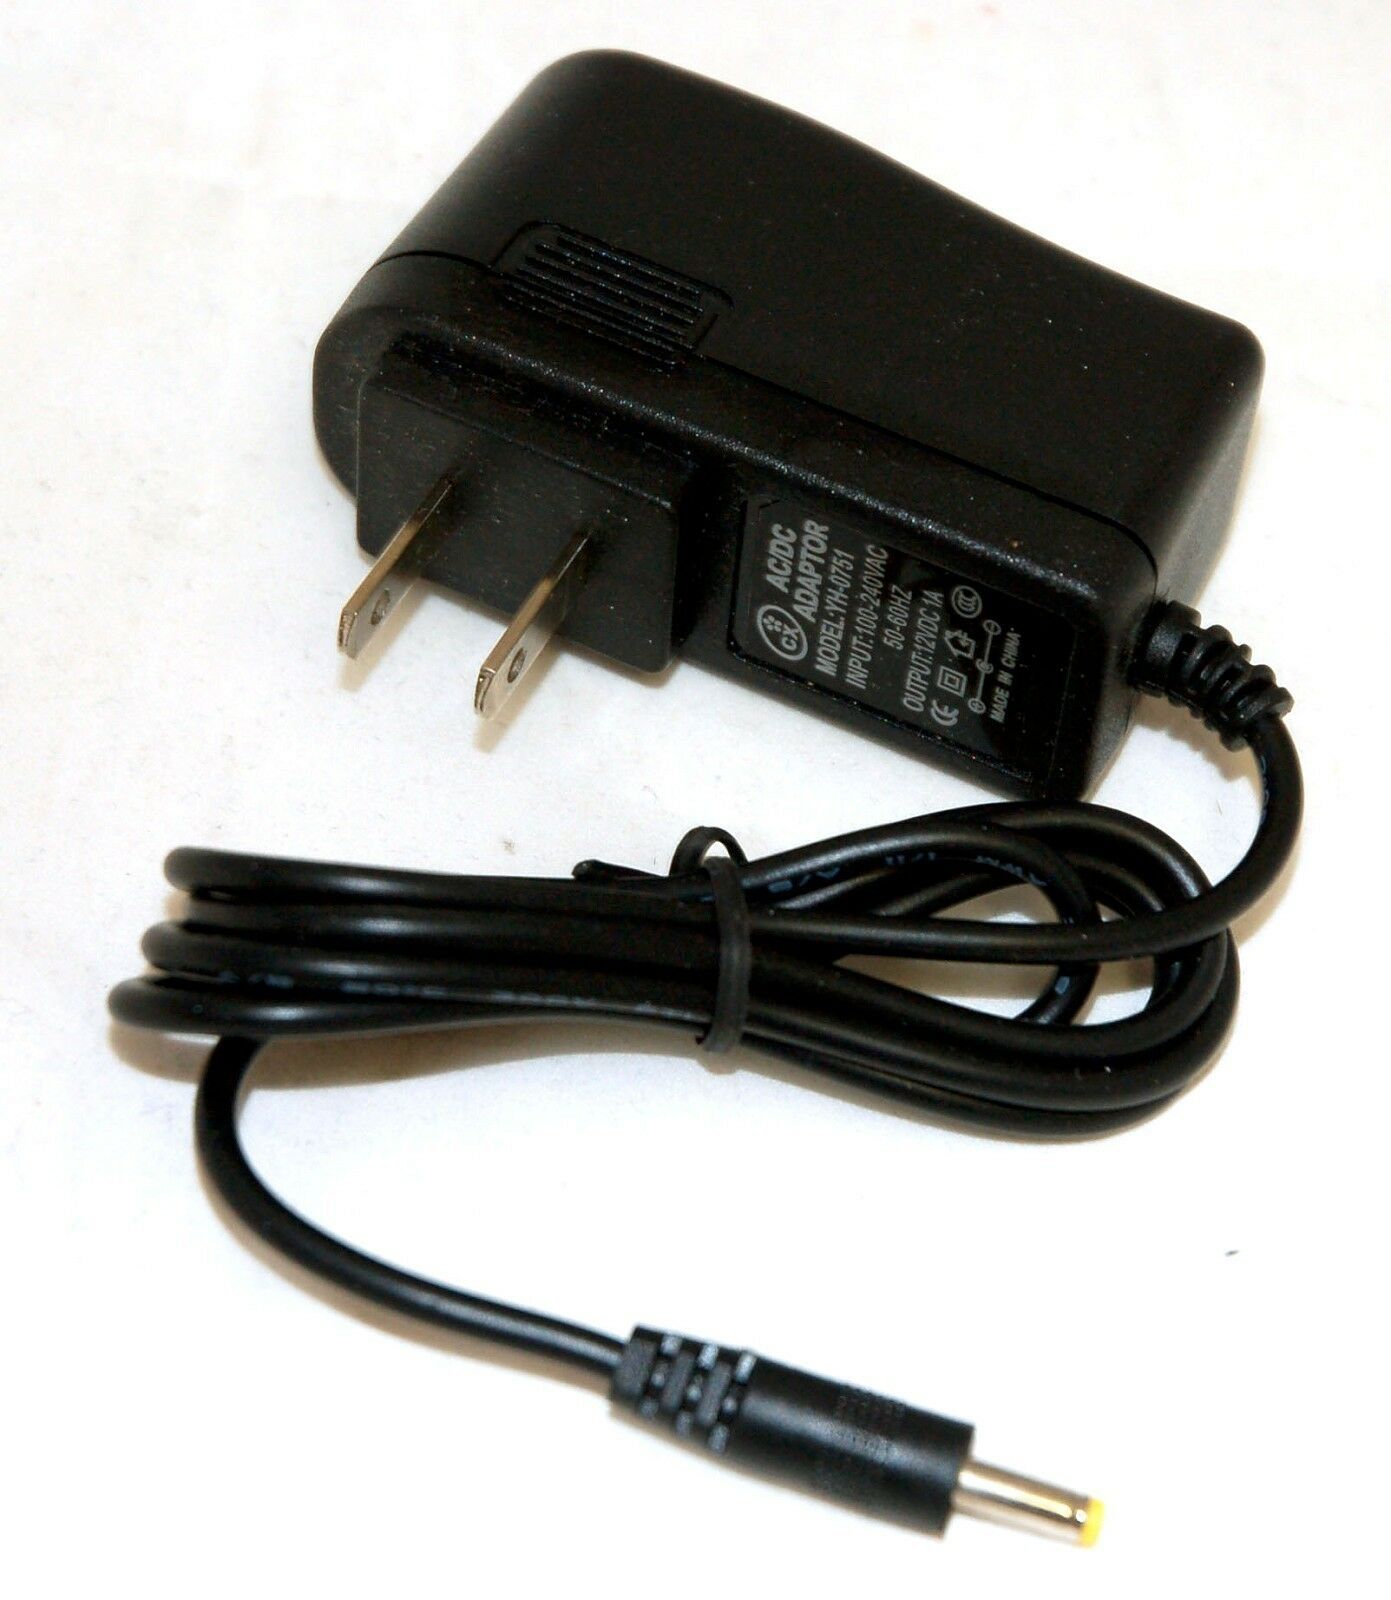 NEW 12V 1A AC Adapter for JBL FLIP 1 Speaker charger Wireless Bluetooth dock 6132A 6132A-JB